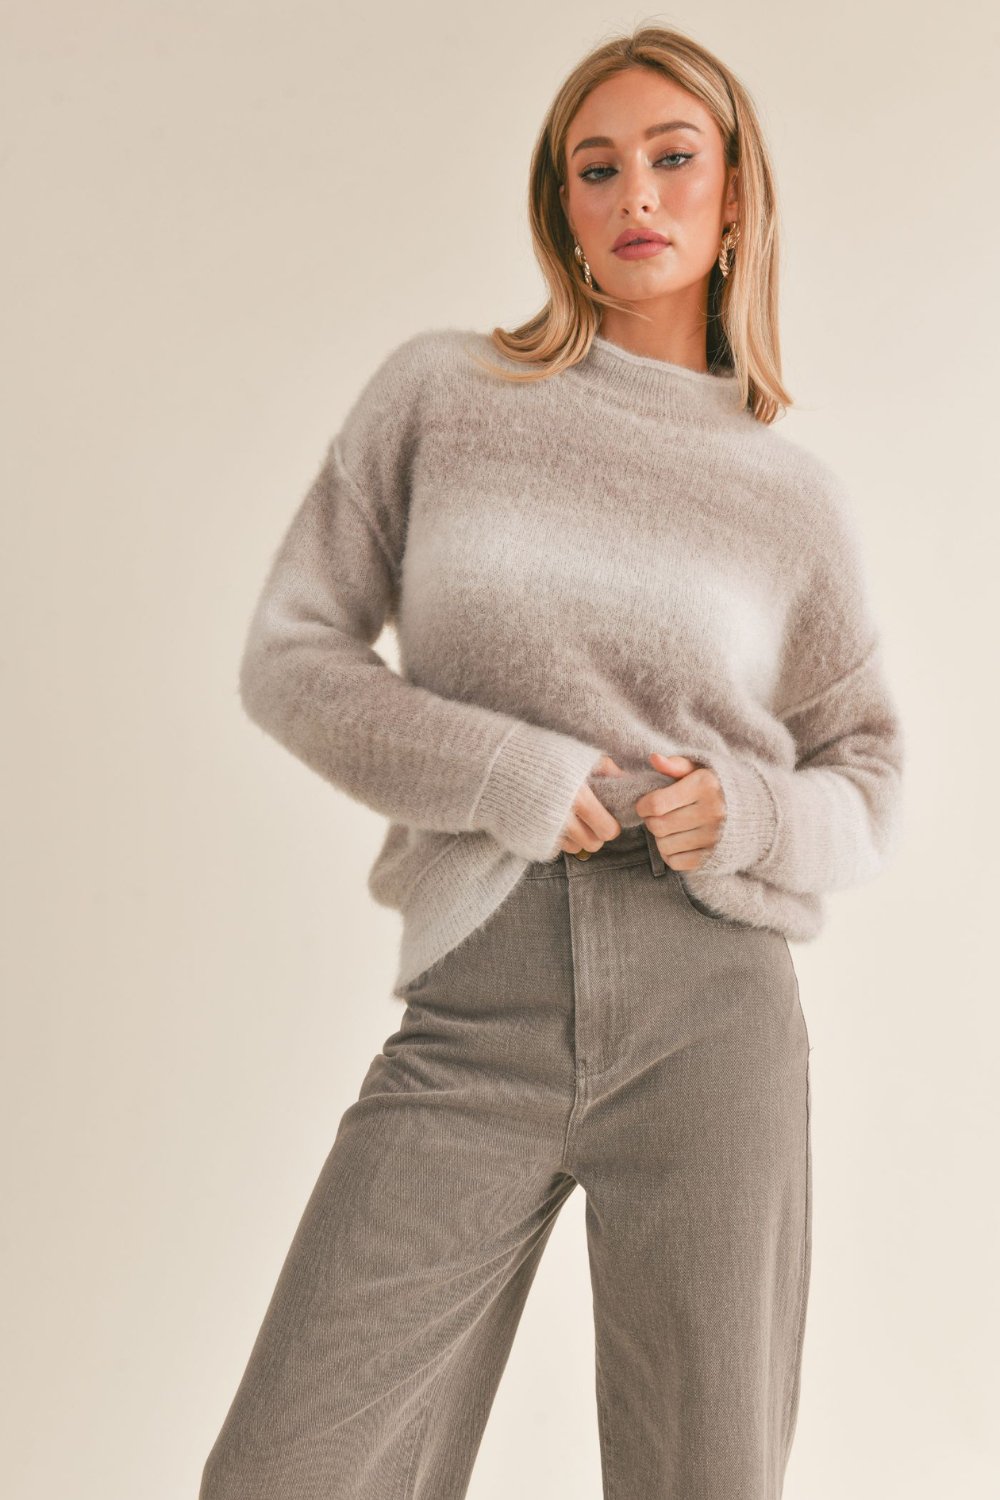 Women's Ombre Knit Sweater | Relaxed Fit | Taupe Multi - Women's Sweaters - Blooming Daily